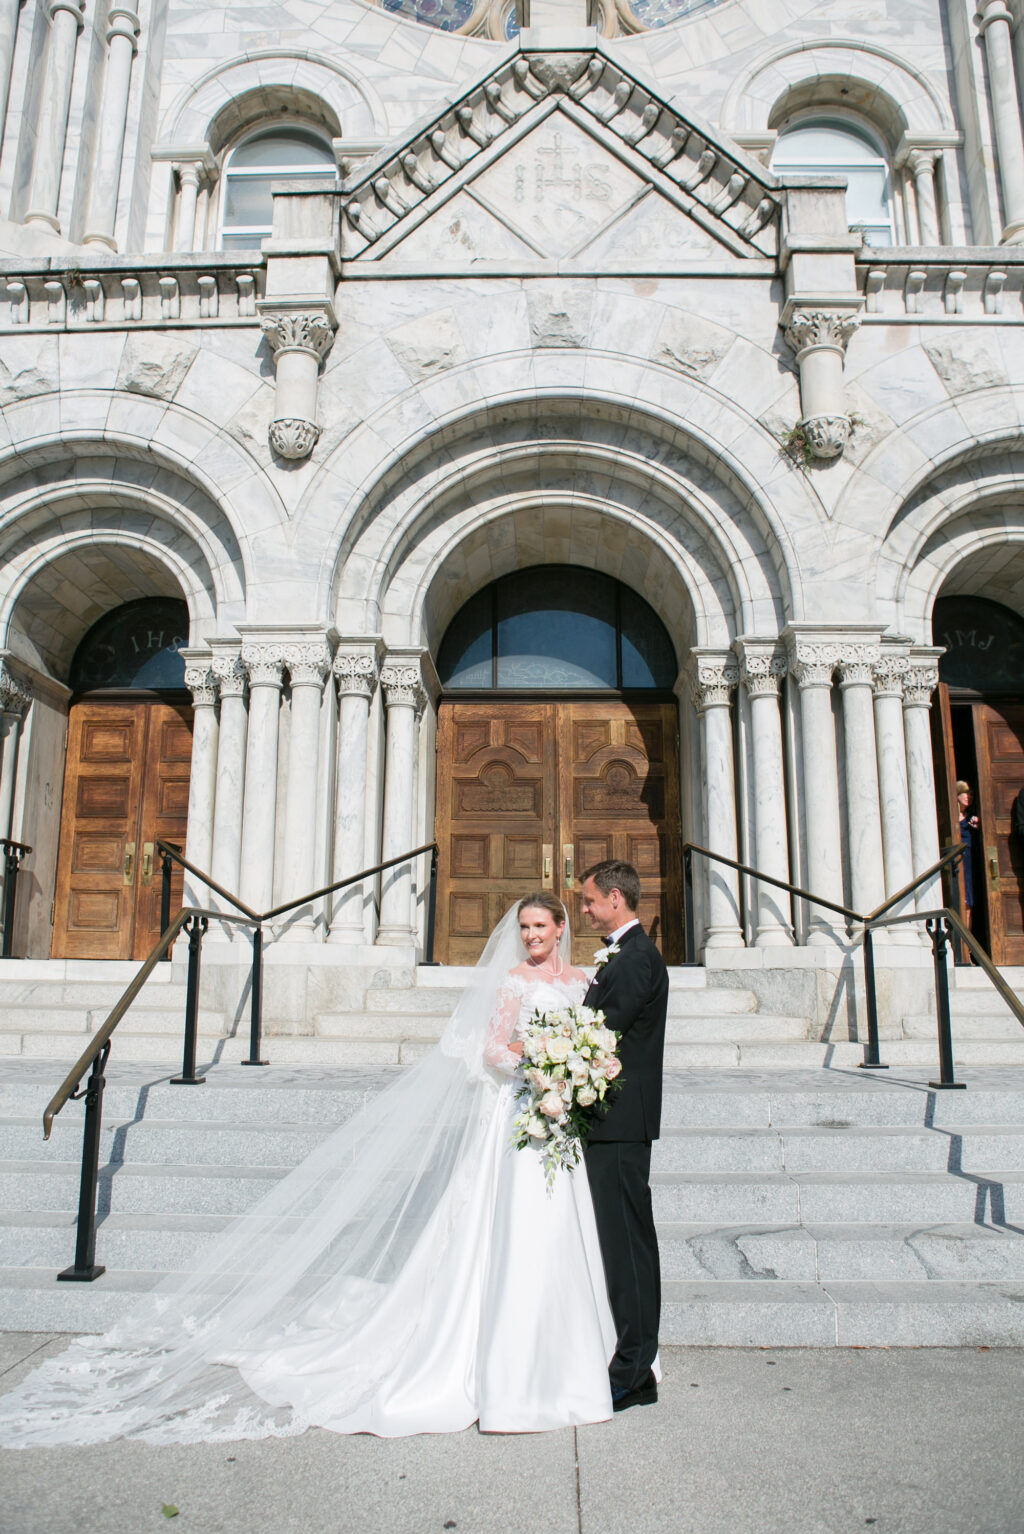 Downtown Tampa Bay Catholic Wedding Inspiration | Tampa Bay Photographer Carrie Wildes Photography